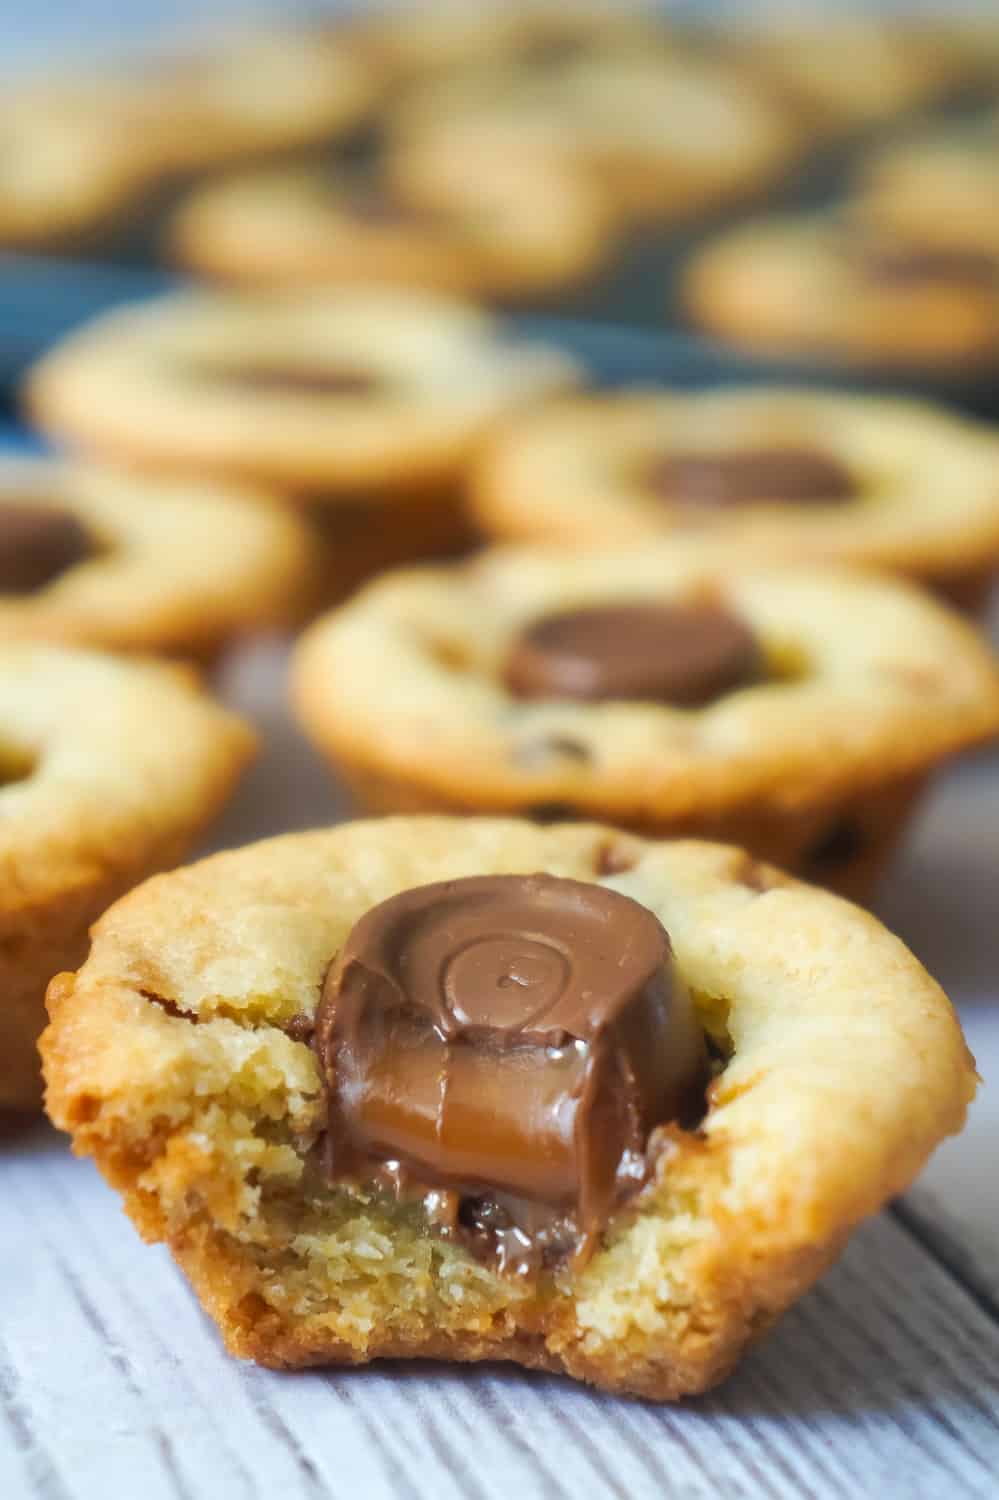 Rolo Sugar Cookie Cups are an easy dessert recipe using Betty Crocker Sugar Cookie Mix. These delicious cookies are baked in mini muffin tins and loaded with Skor bits, mini chocolate chips and Rolo chocolates.